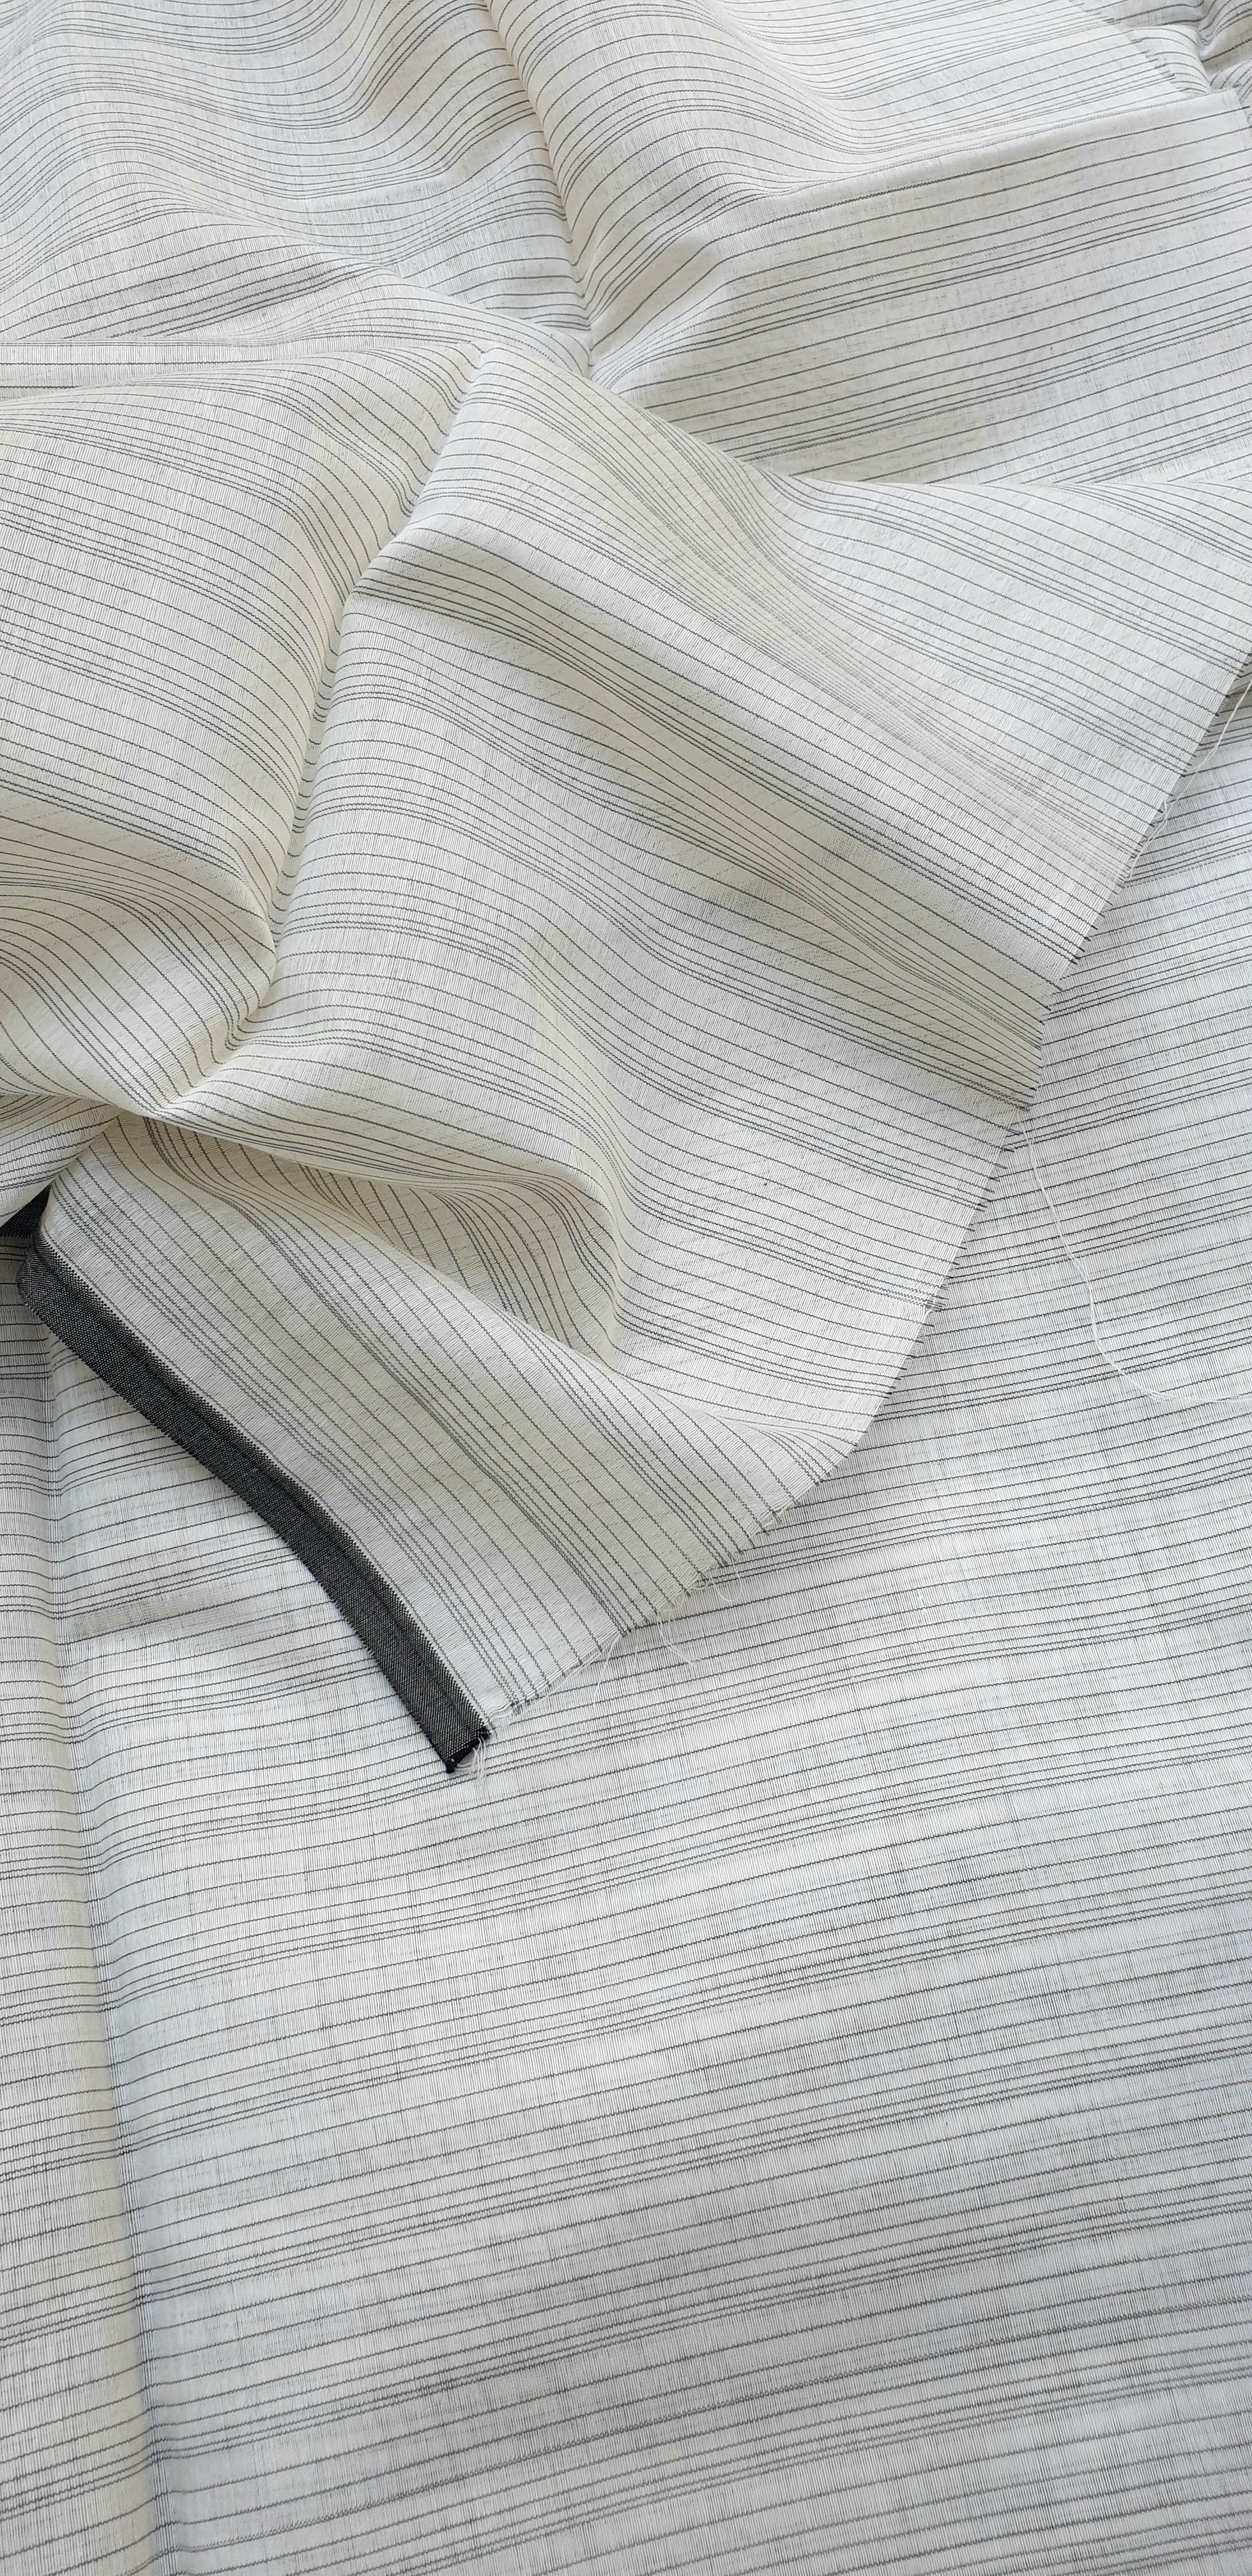 Fabric with Black and White Warp Stripes.